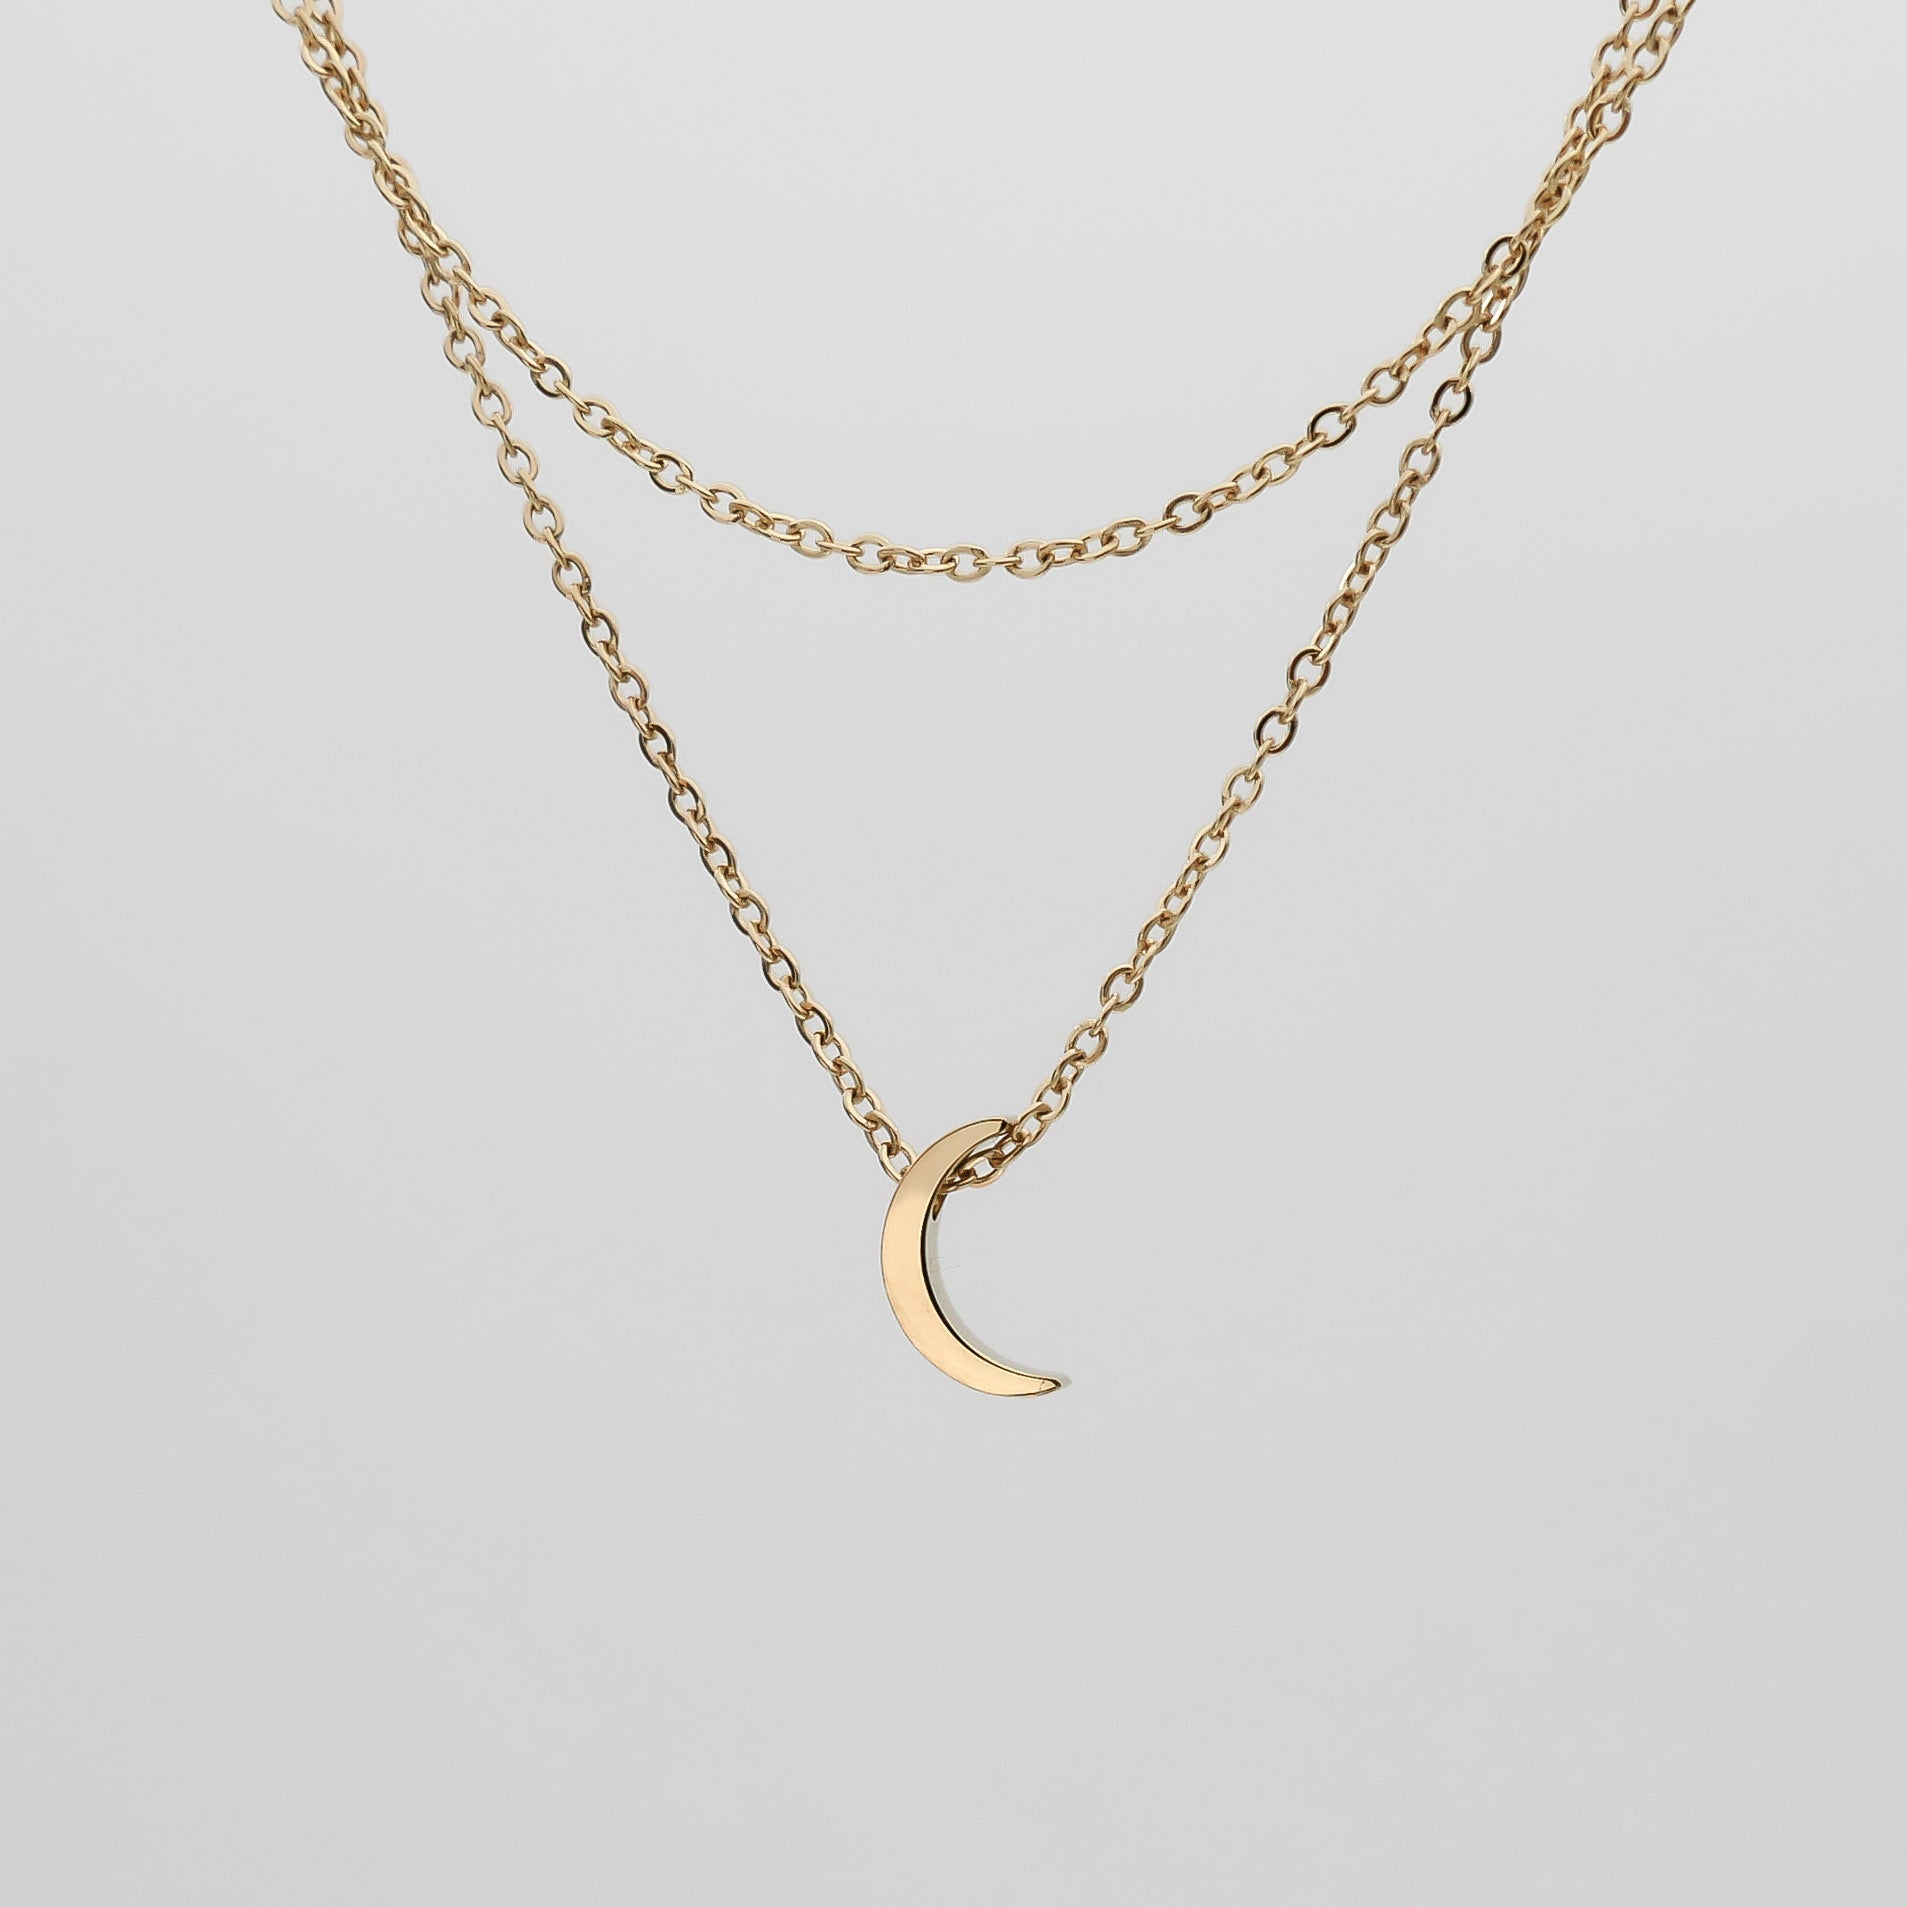 Celine Layered Moon Necklace